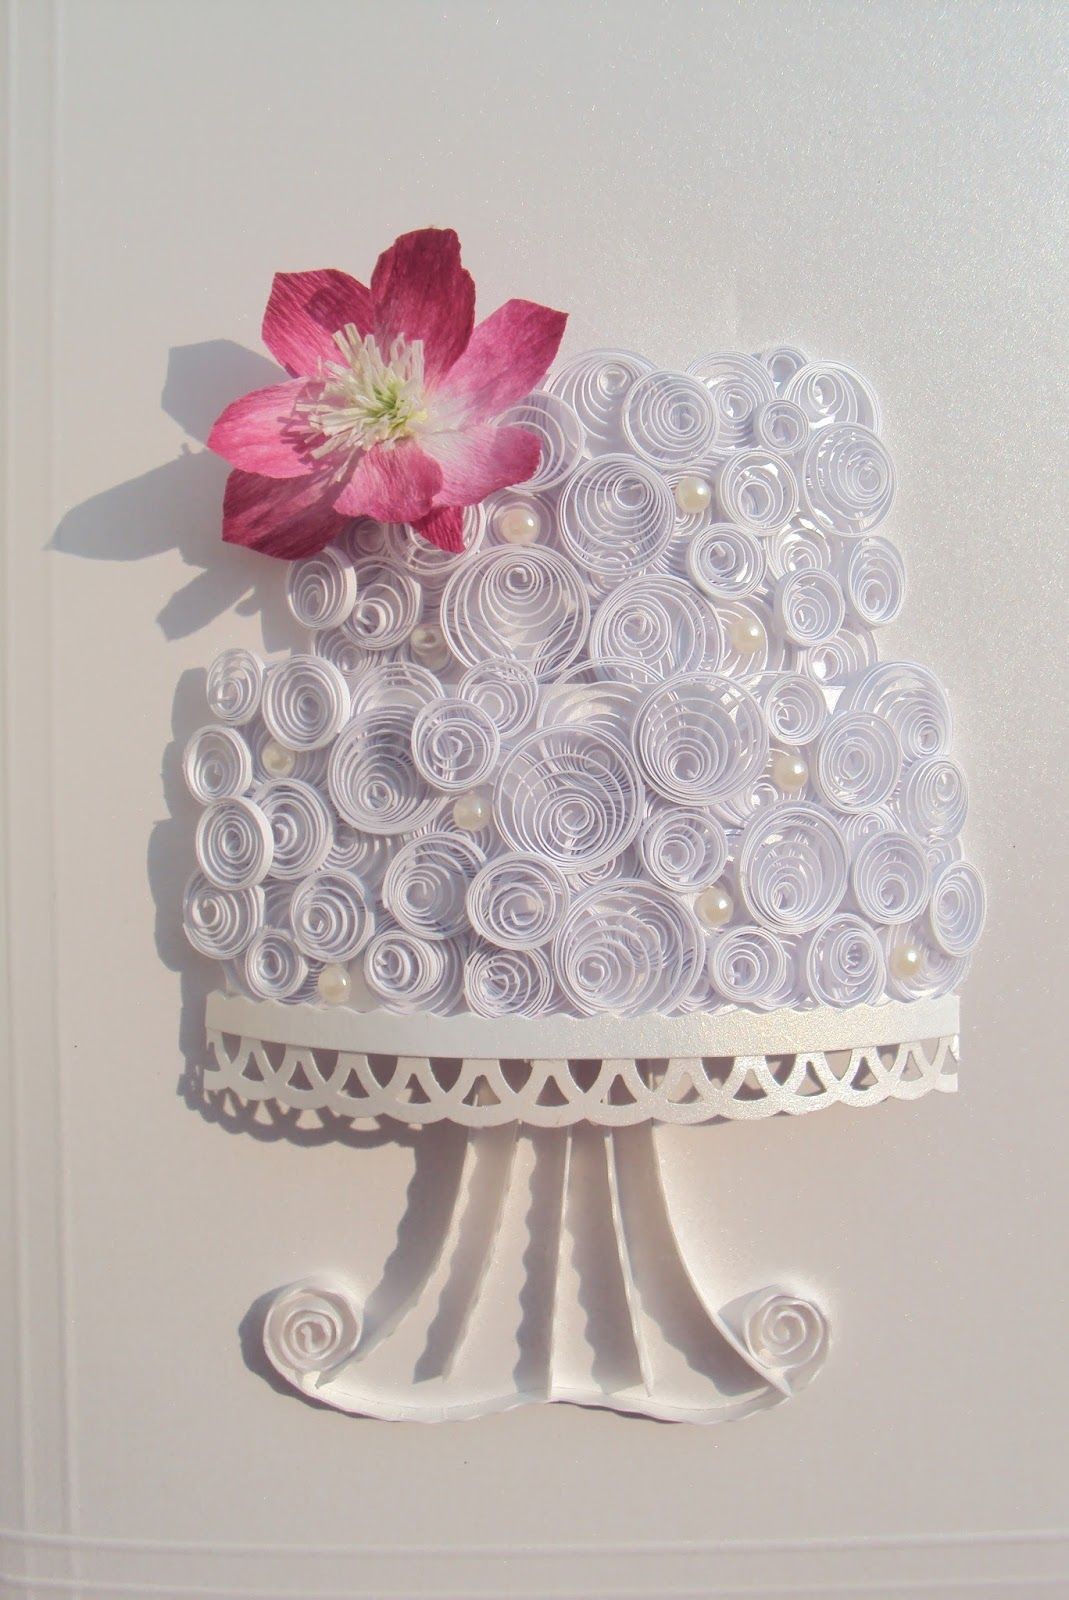 Cake Papercraft Quilling Seasons Cake This is Spectacular Quiling